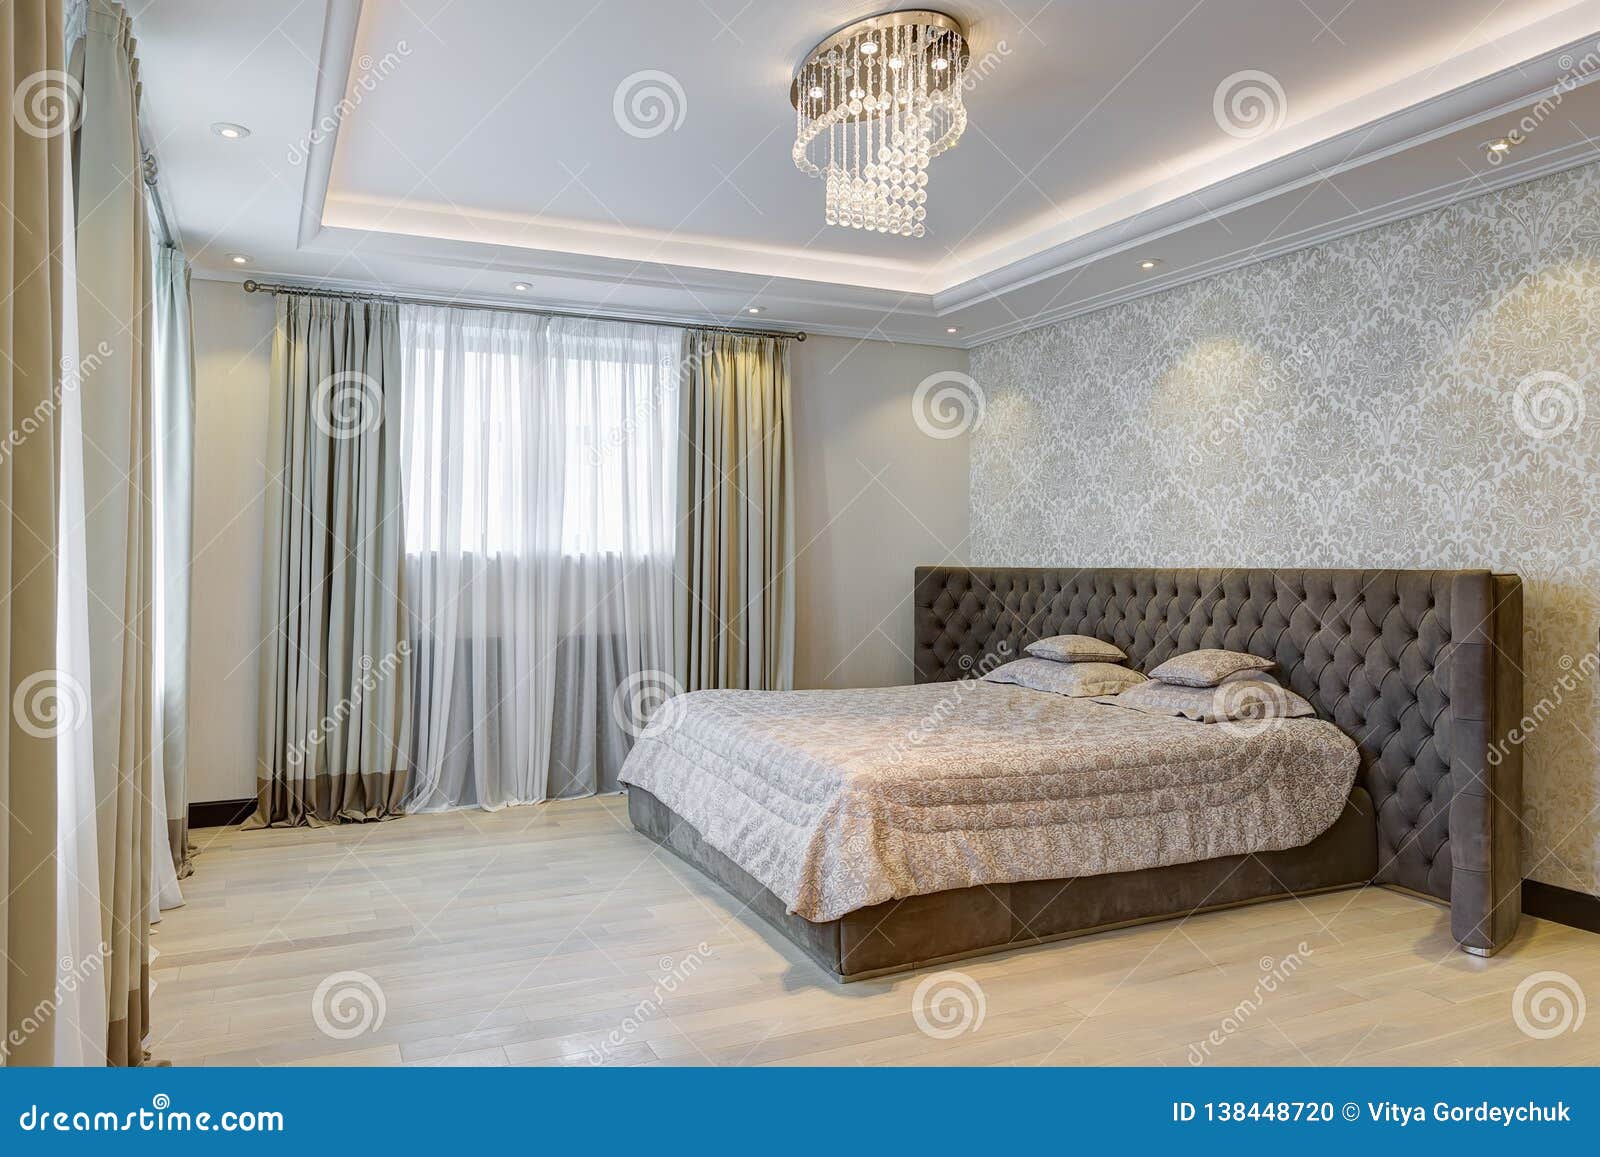 Interior Of Gray Bedroom With Crystal Chandelier Stock